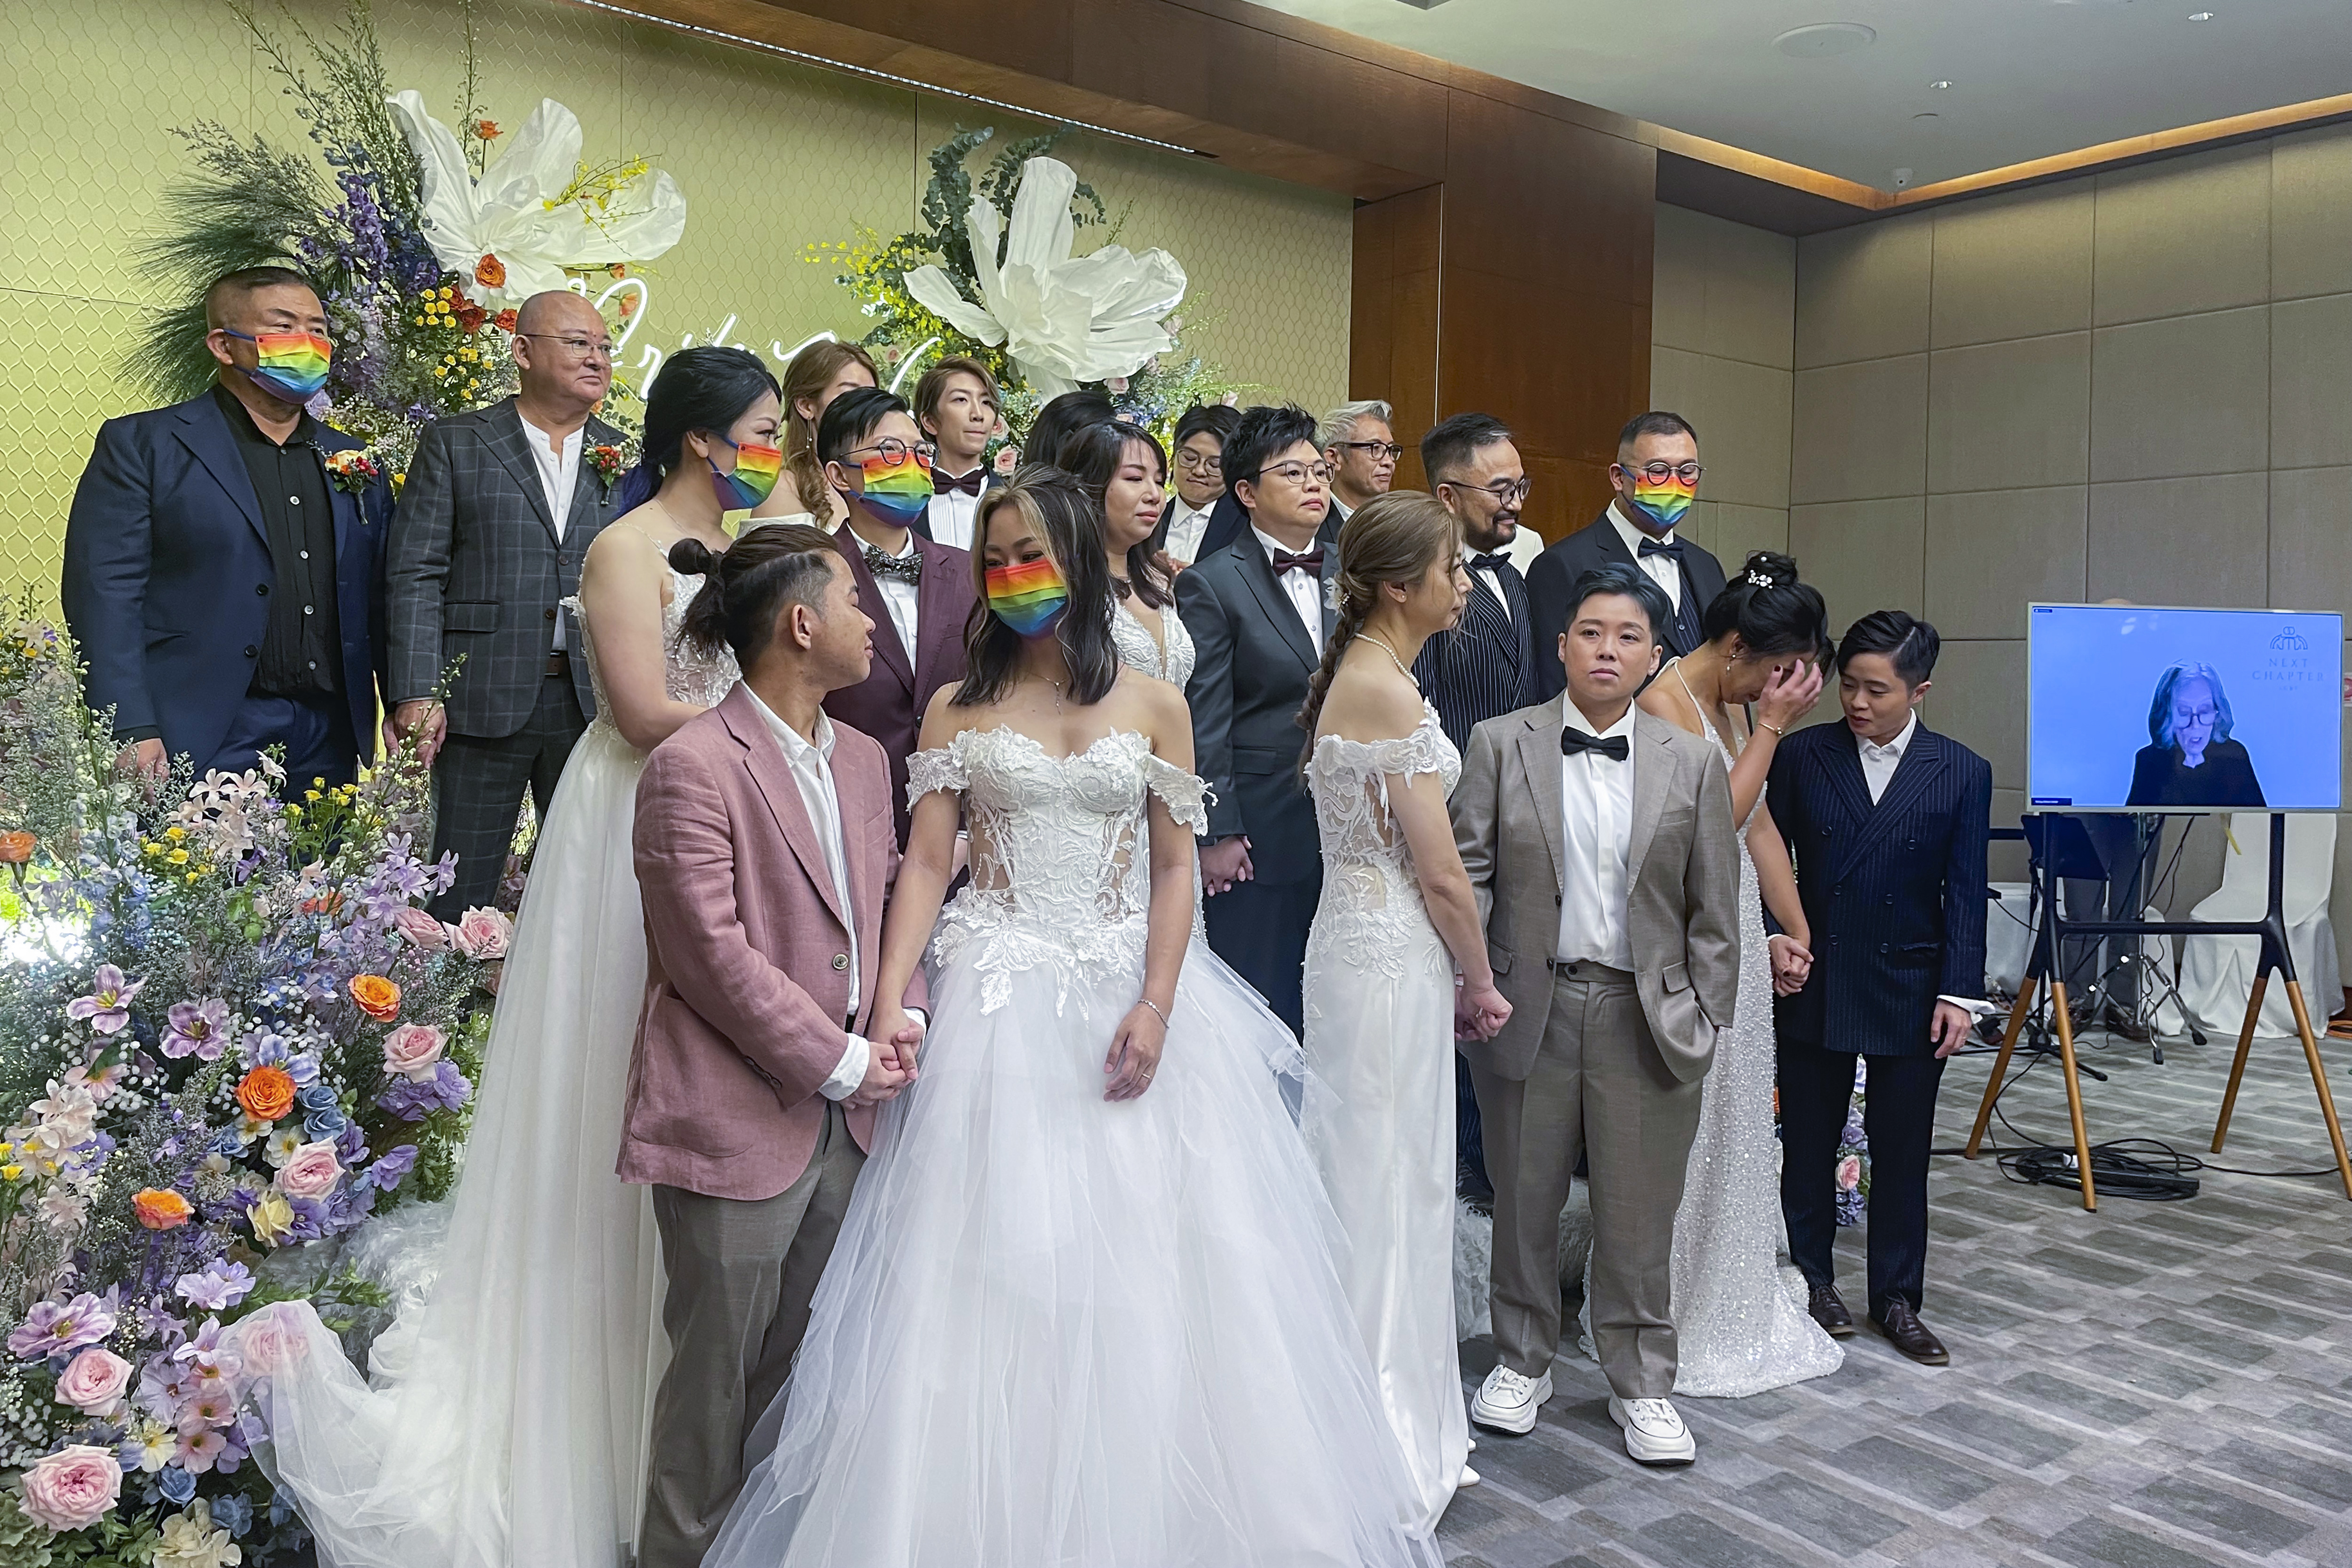 Ten same-sex couples who got married in the United States over the internet stand during their wedding at Eaton Hotel, Kowloon, Hong Kong, Tuesday, June 25, 2024. The semi-autonomous southern Chinese city does not formally recognize such unions but offers them legal protections. The event Tuesday was timed to mark Pride Month. (AP Photo/Alice Fung)